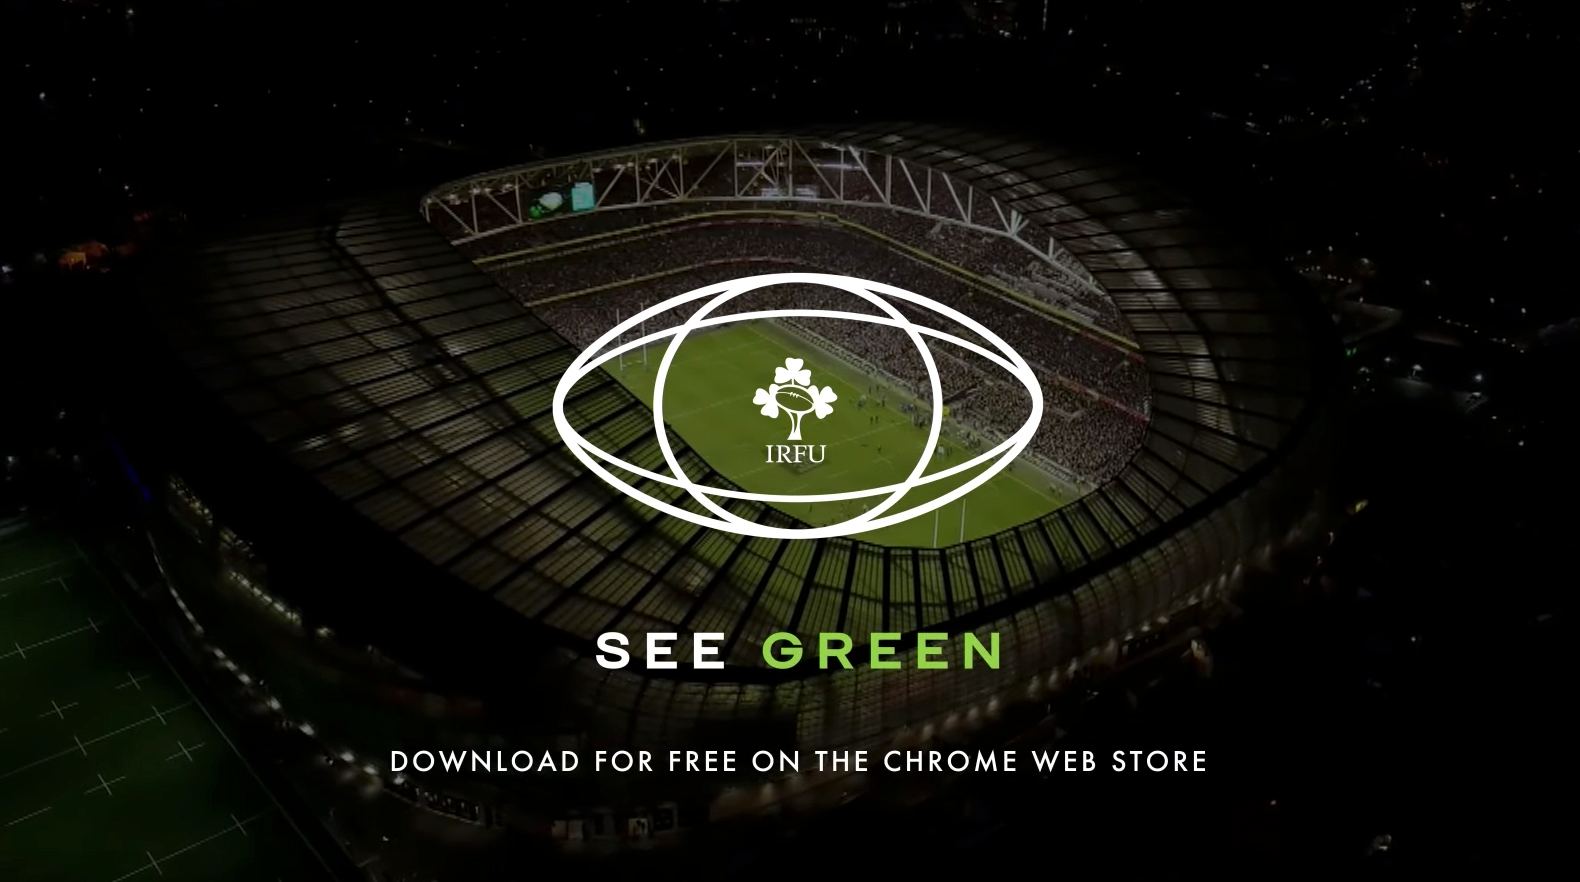 Ahead Of The Rugby World Cup The IRFU Launch A Utility To Help Colour-Blind Fans ‘See Green’